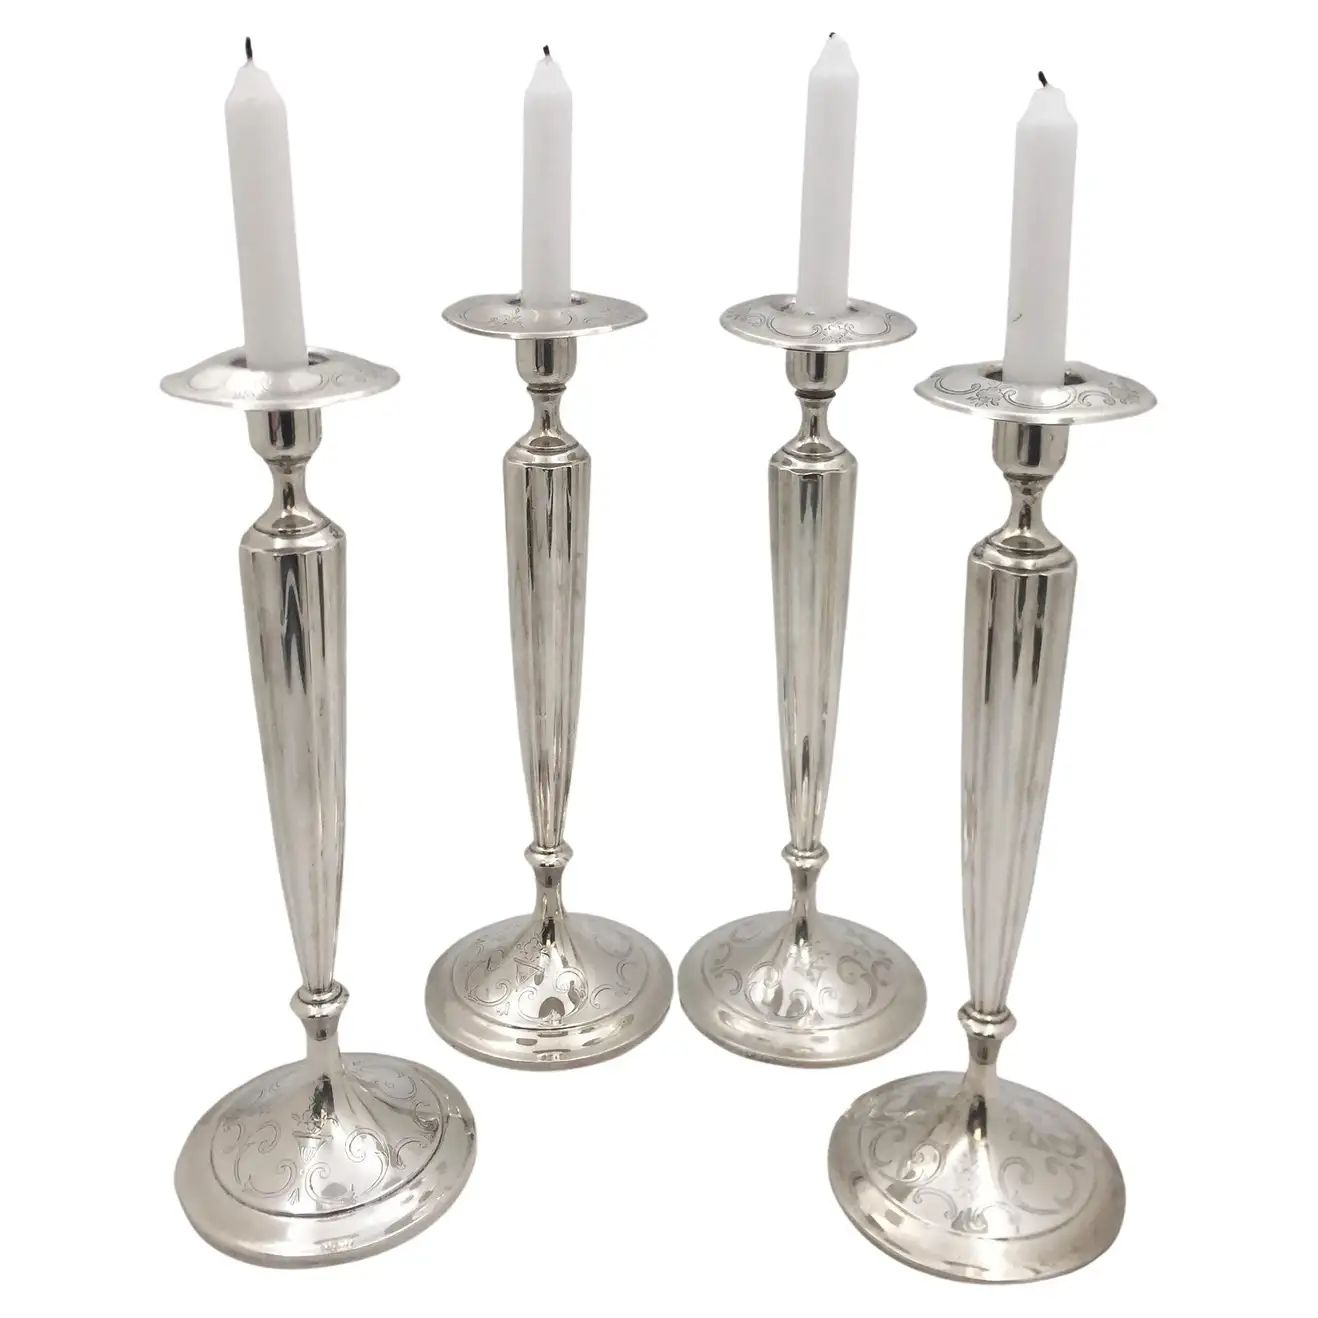 Shreve & Co. Sterling Silver Set of 4 Candlesticks with Floral Motifs | 1stDibs